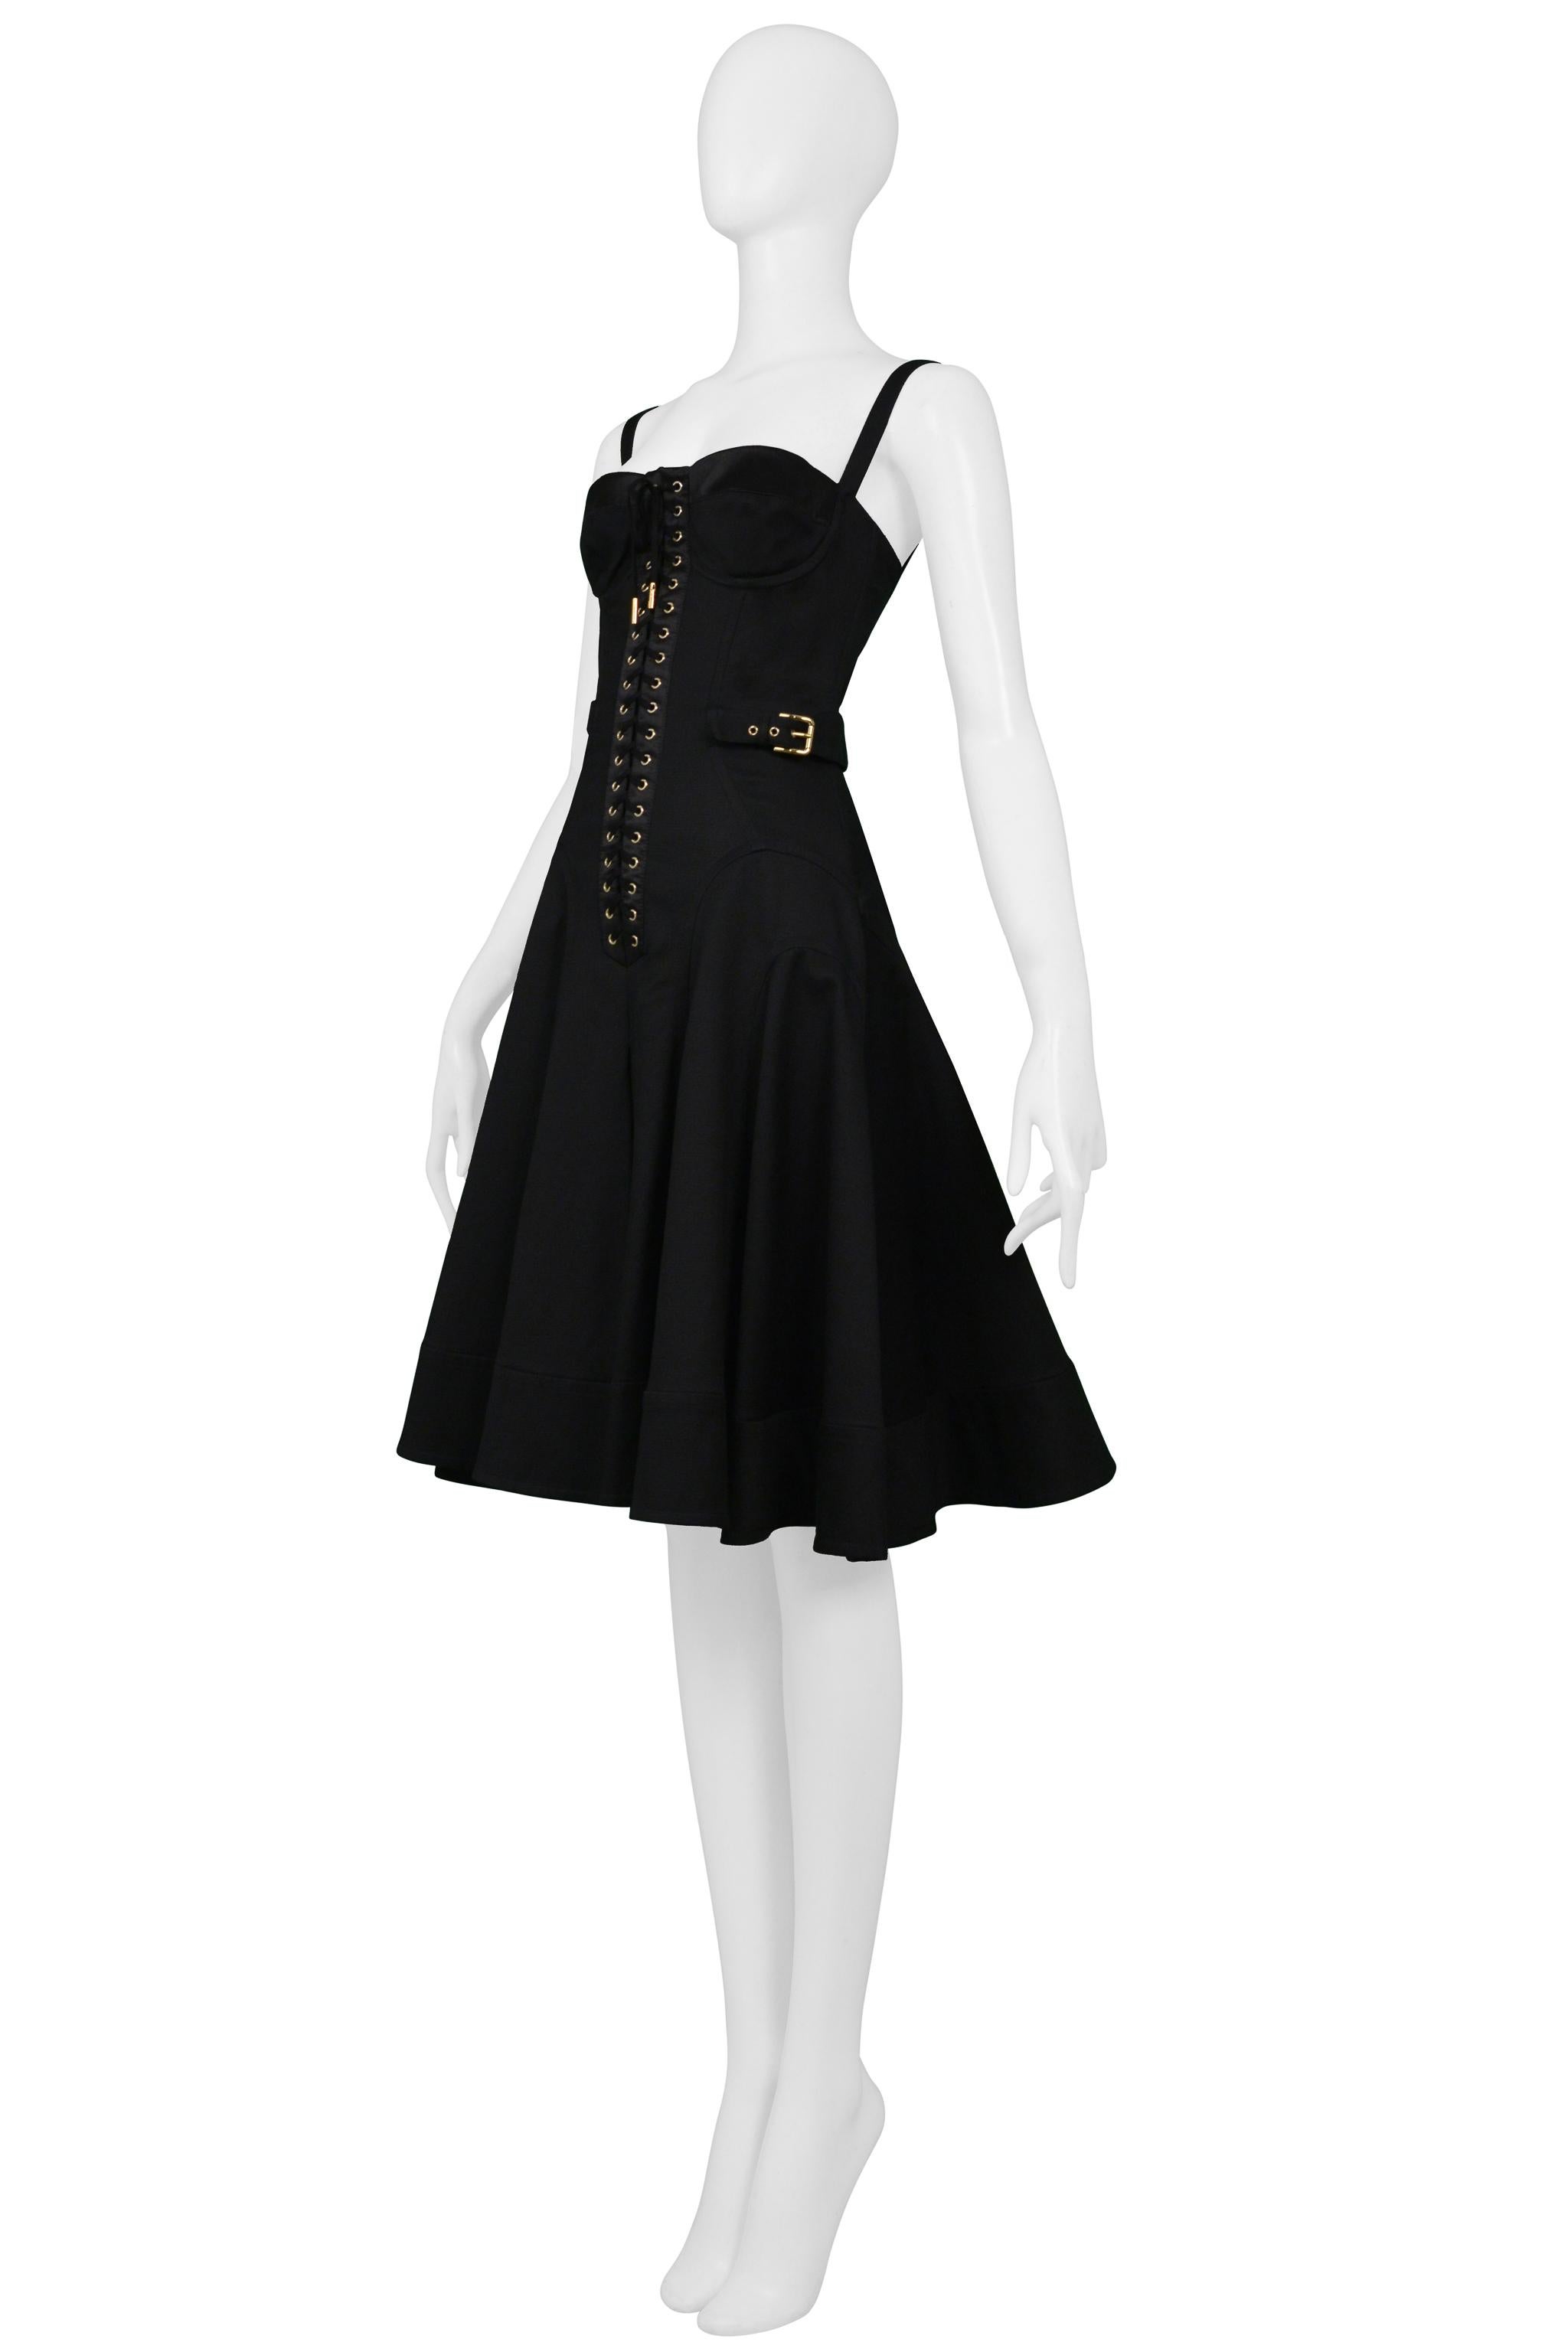 Women's Docle & Gabbana Black Corset Dress With Buckles For Sale